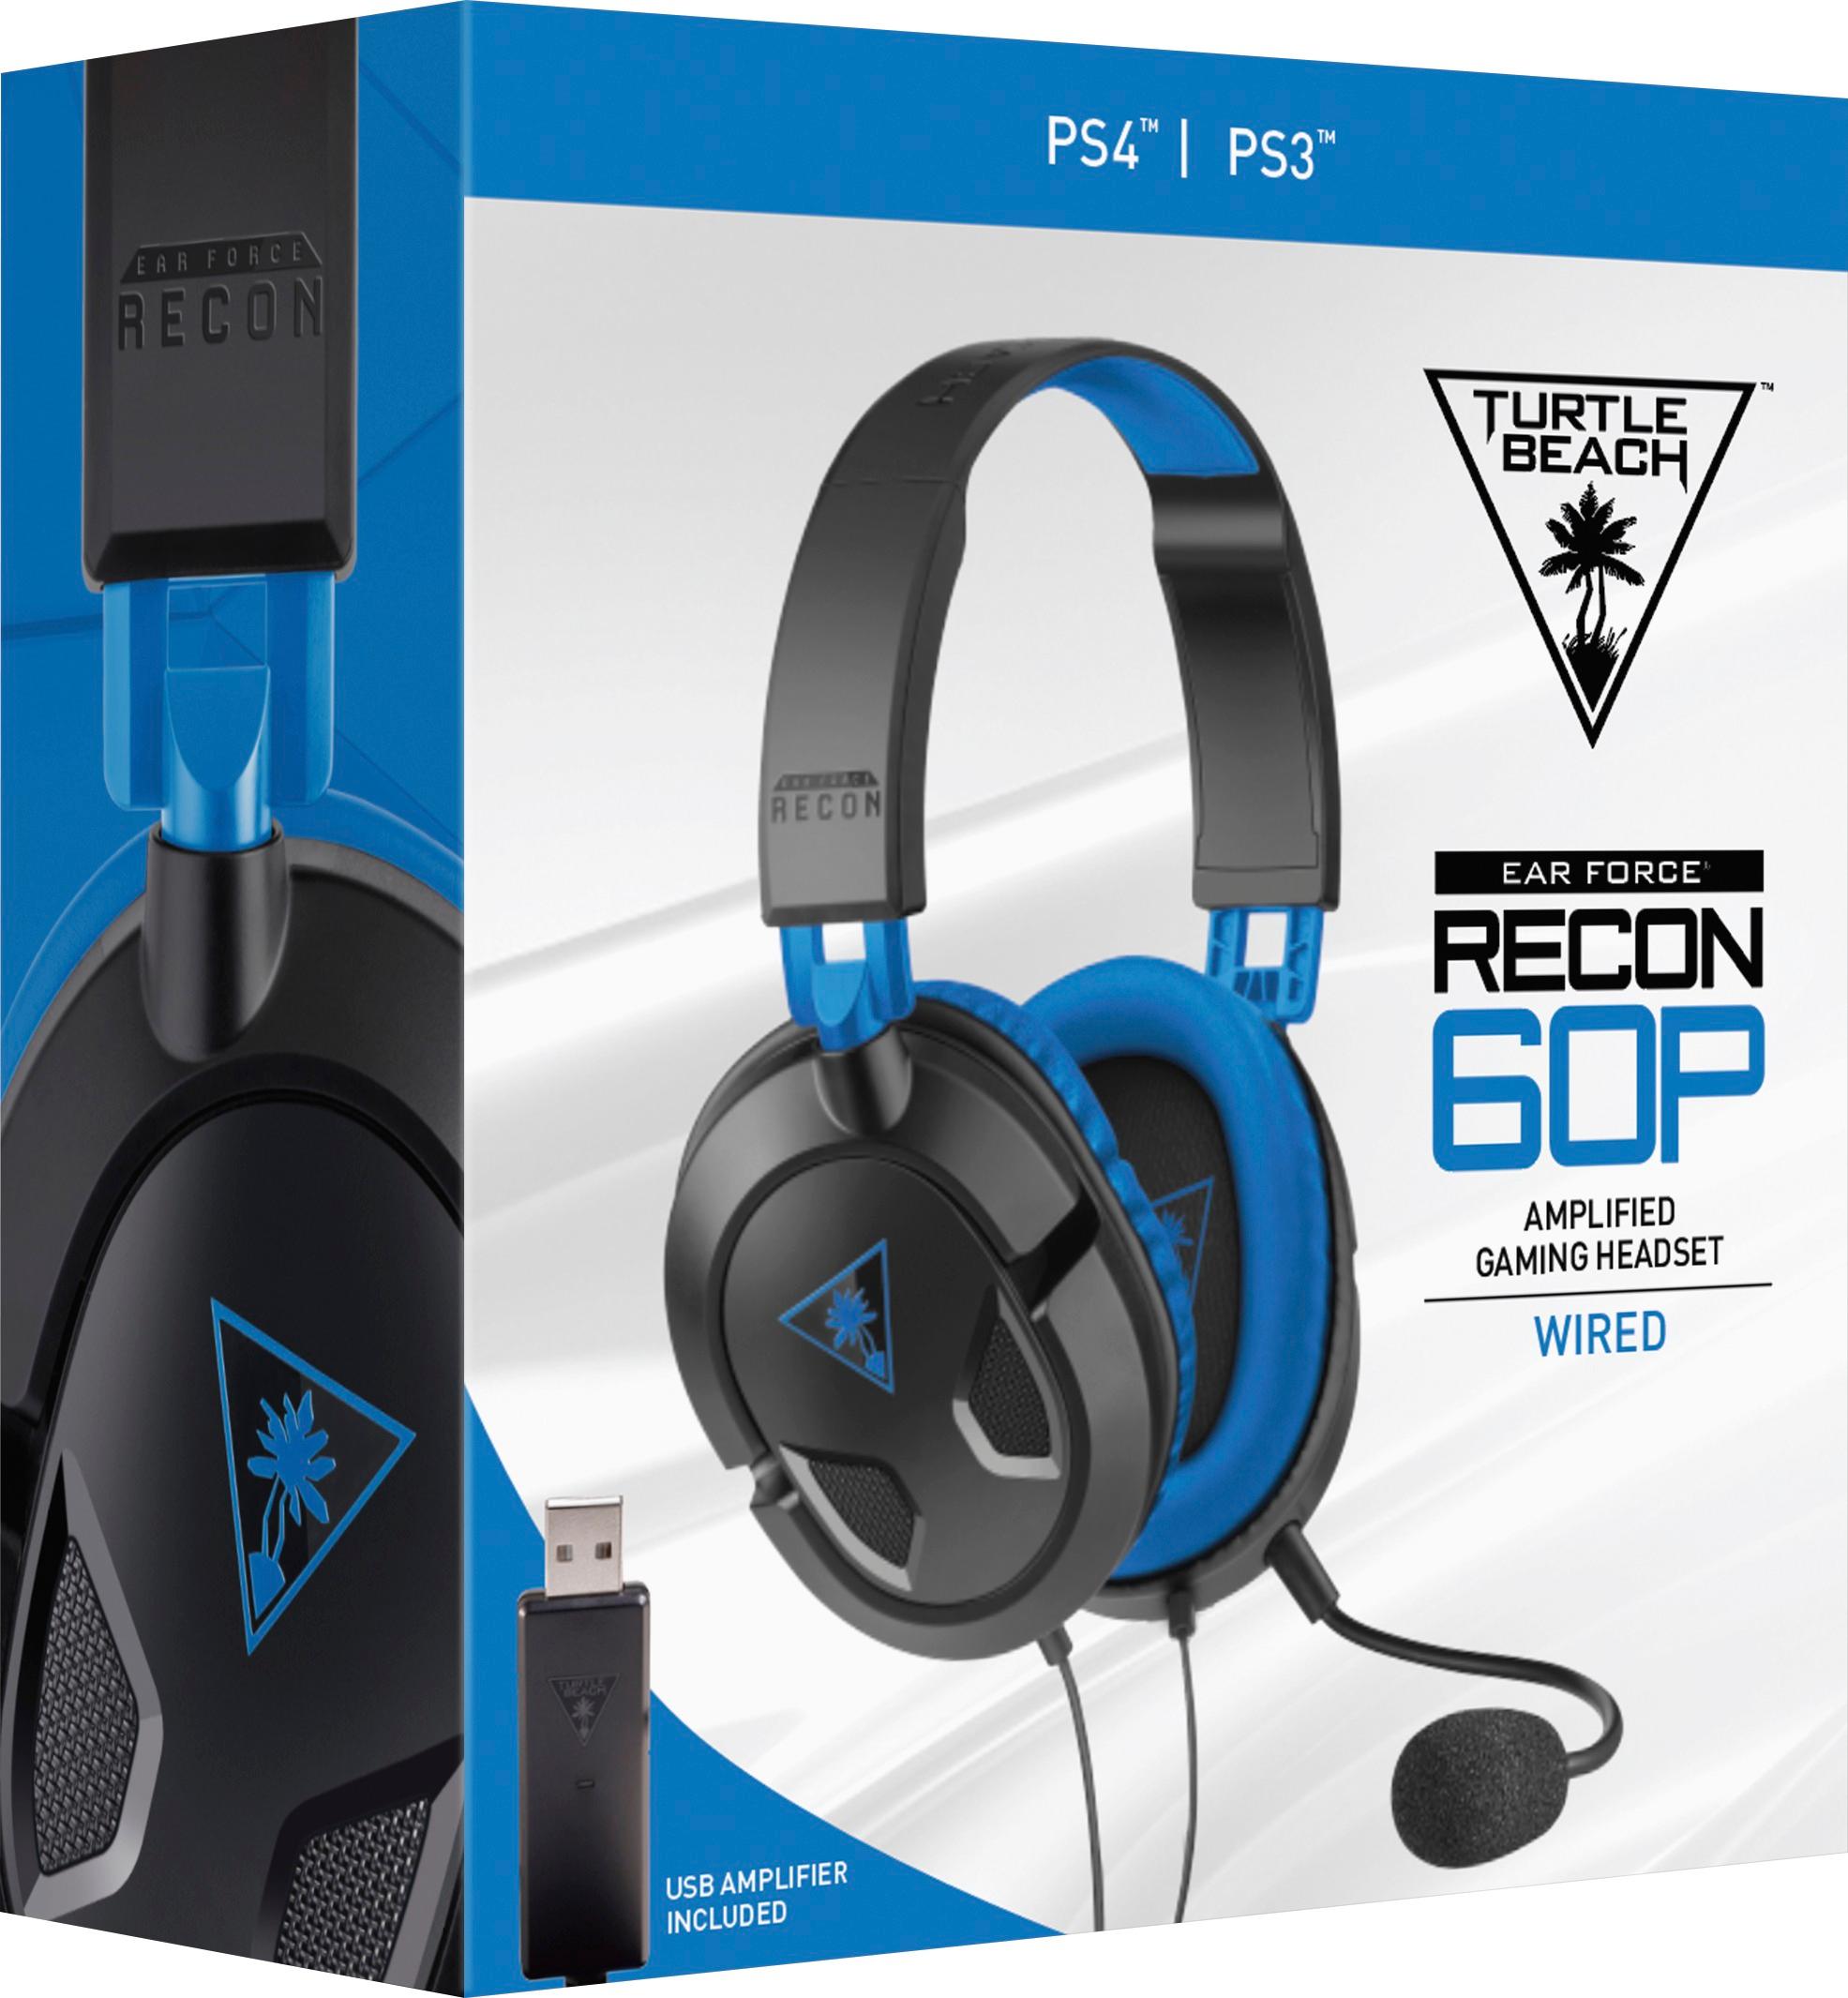 newest turtle beach headset ps4